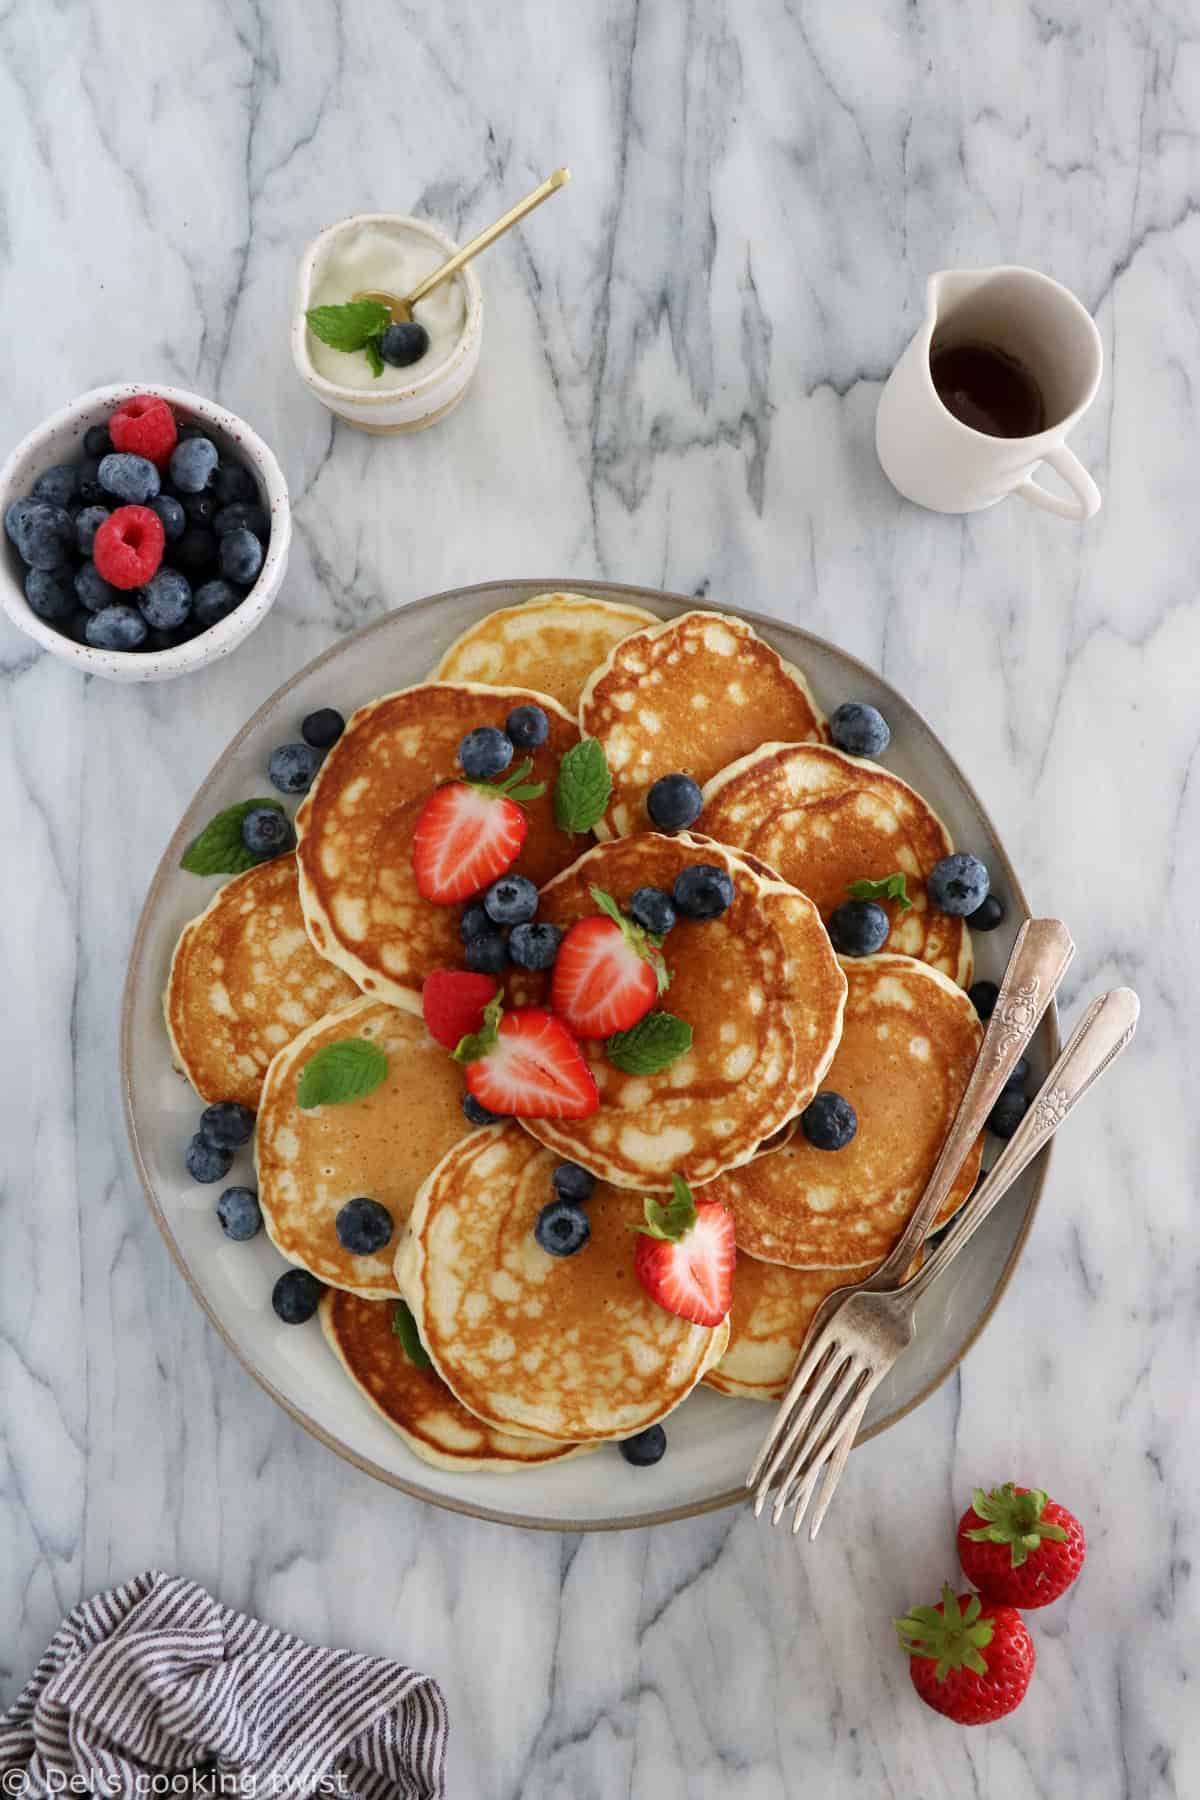 These easy fluffy American pancakes are the BEST pancake recipe you can possibly find. With only 6 ingredients and 2 minutes preparation, you get generous and fluffy pancakes with no effort.